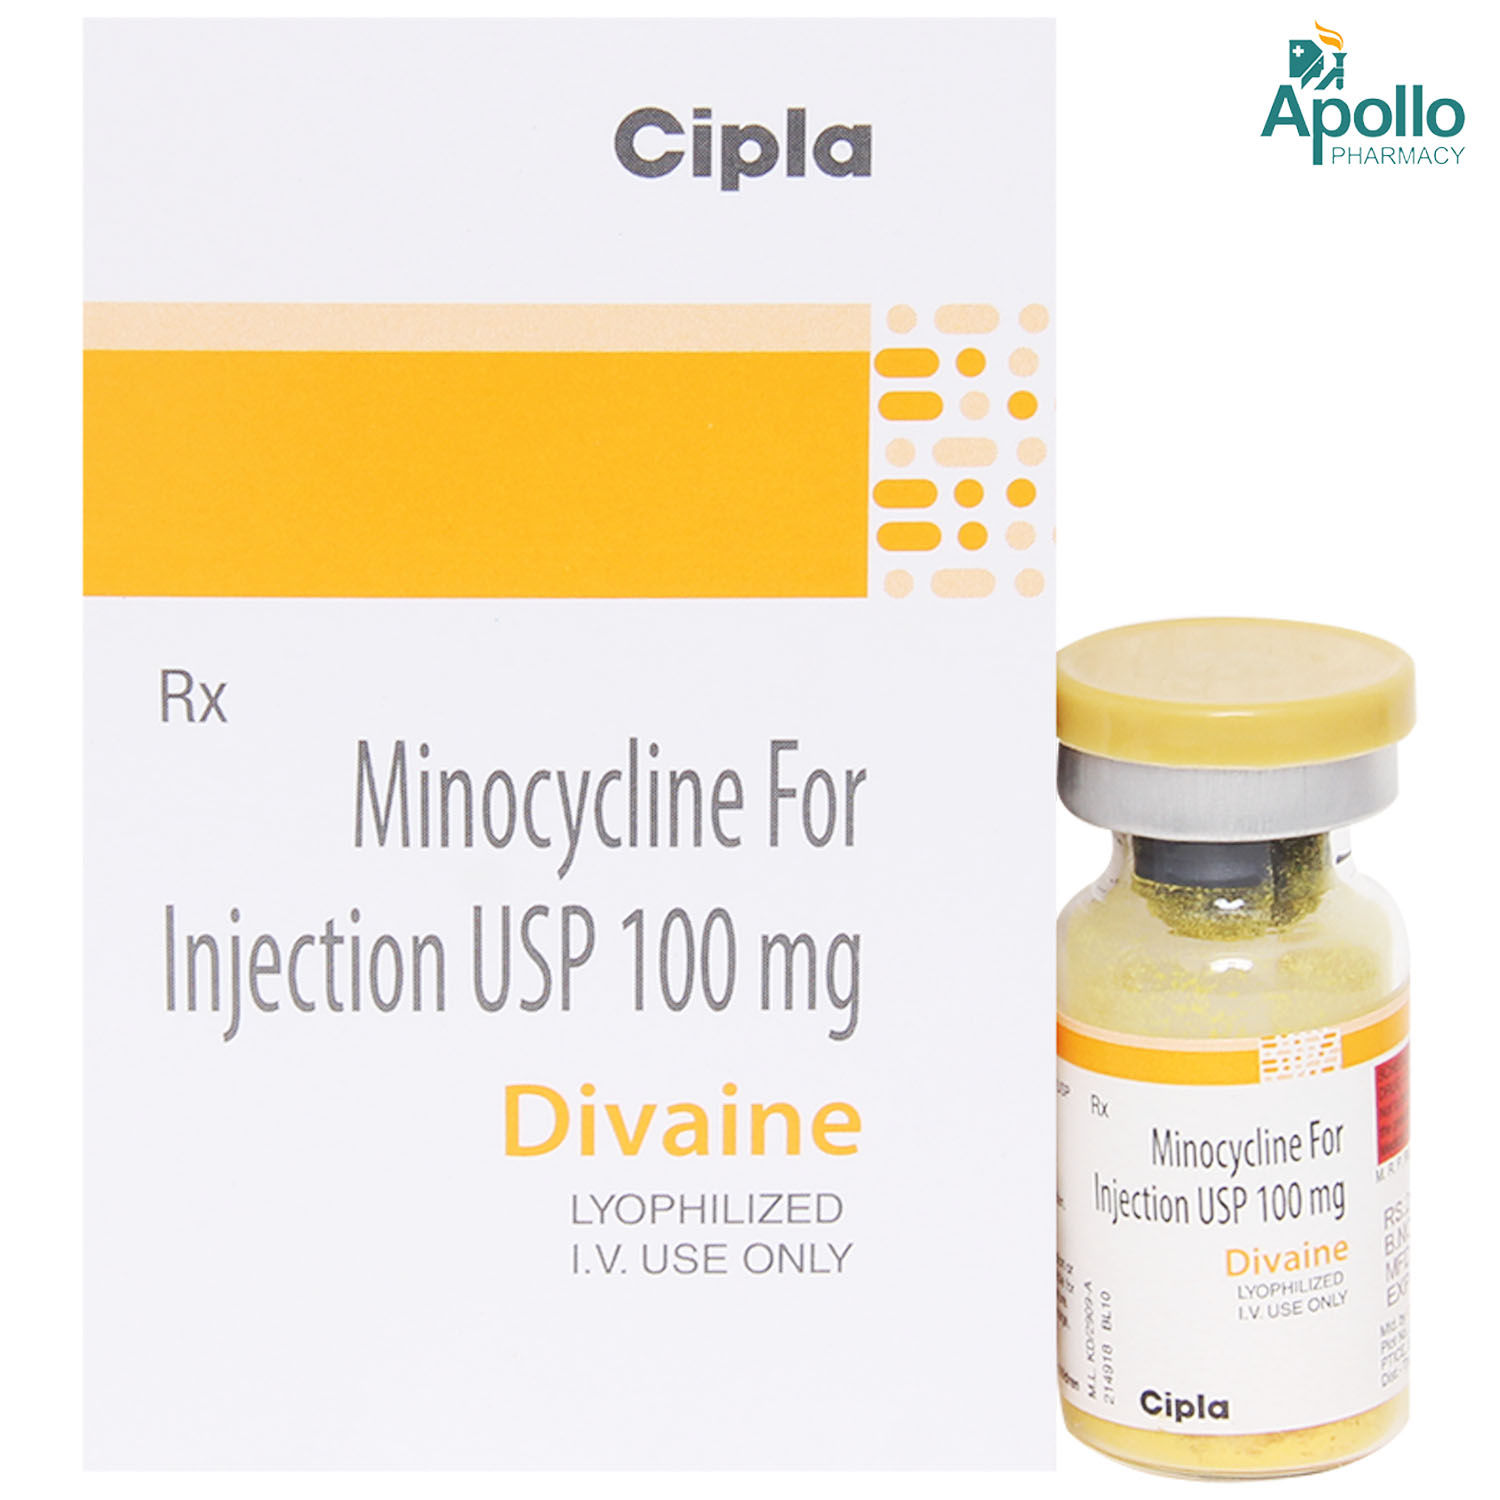 DIVAINE 100MG INJECTION, Pack of 1 INJECTION